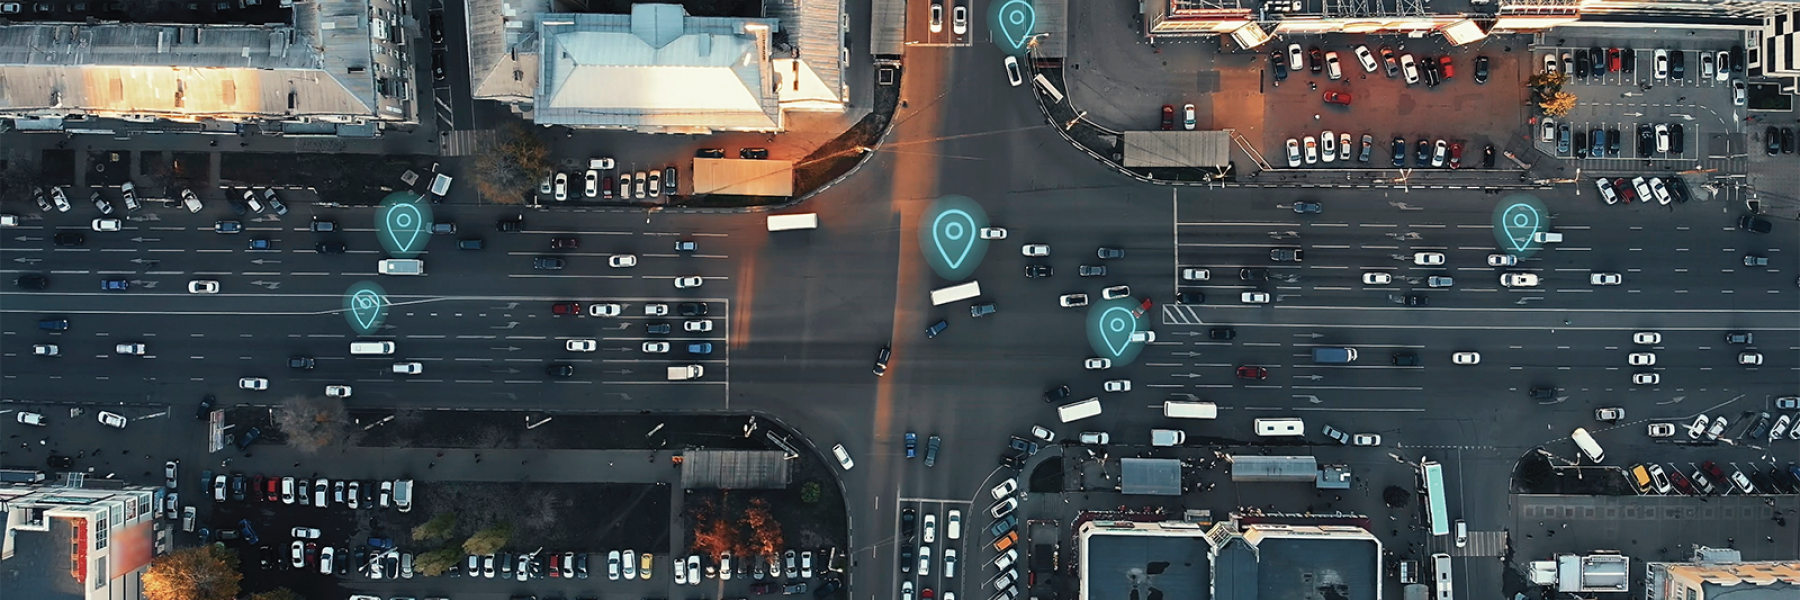 Aerial view of city street with location pings on cars